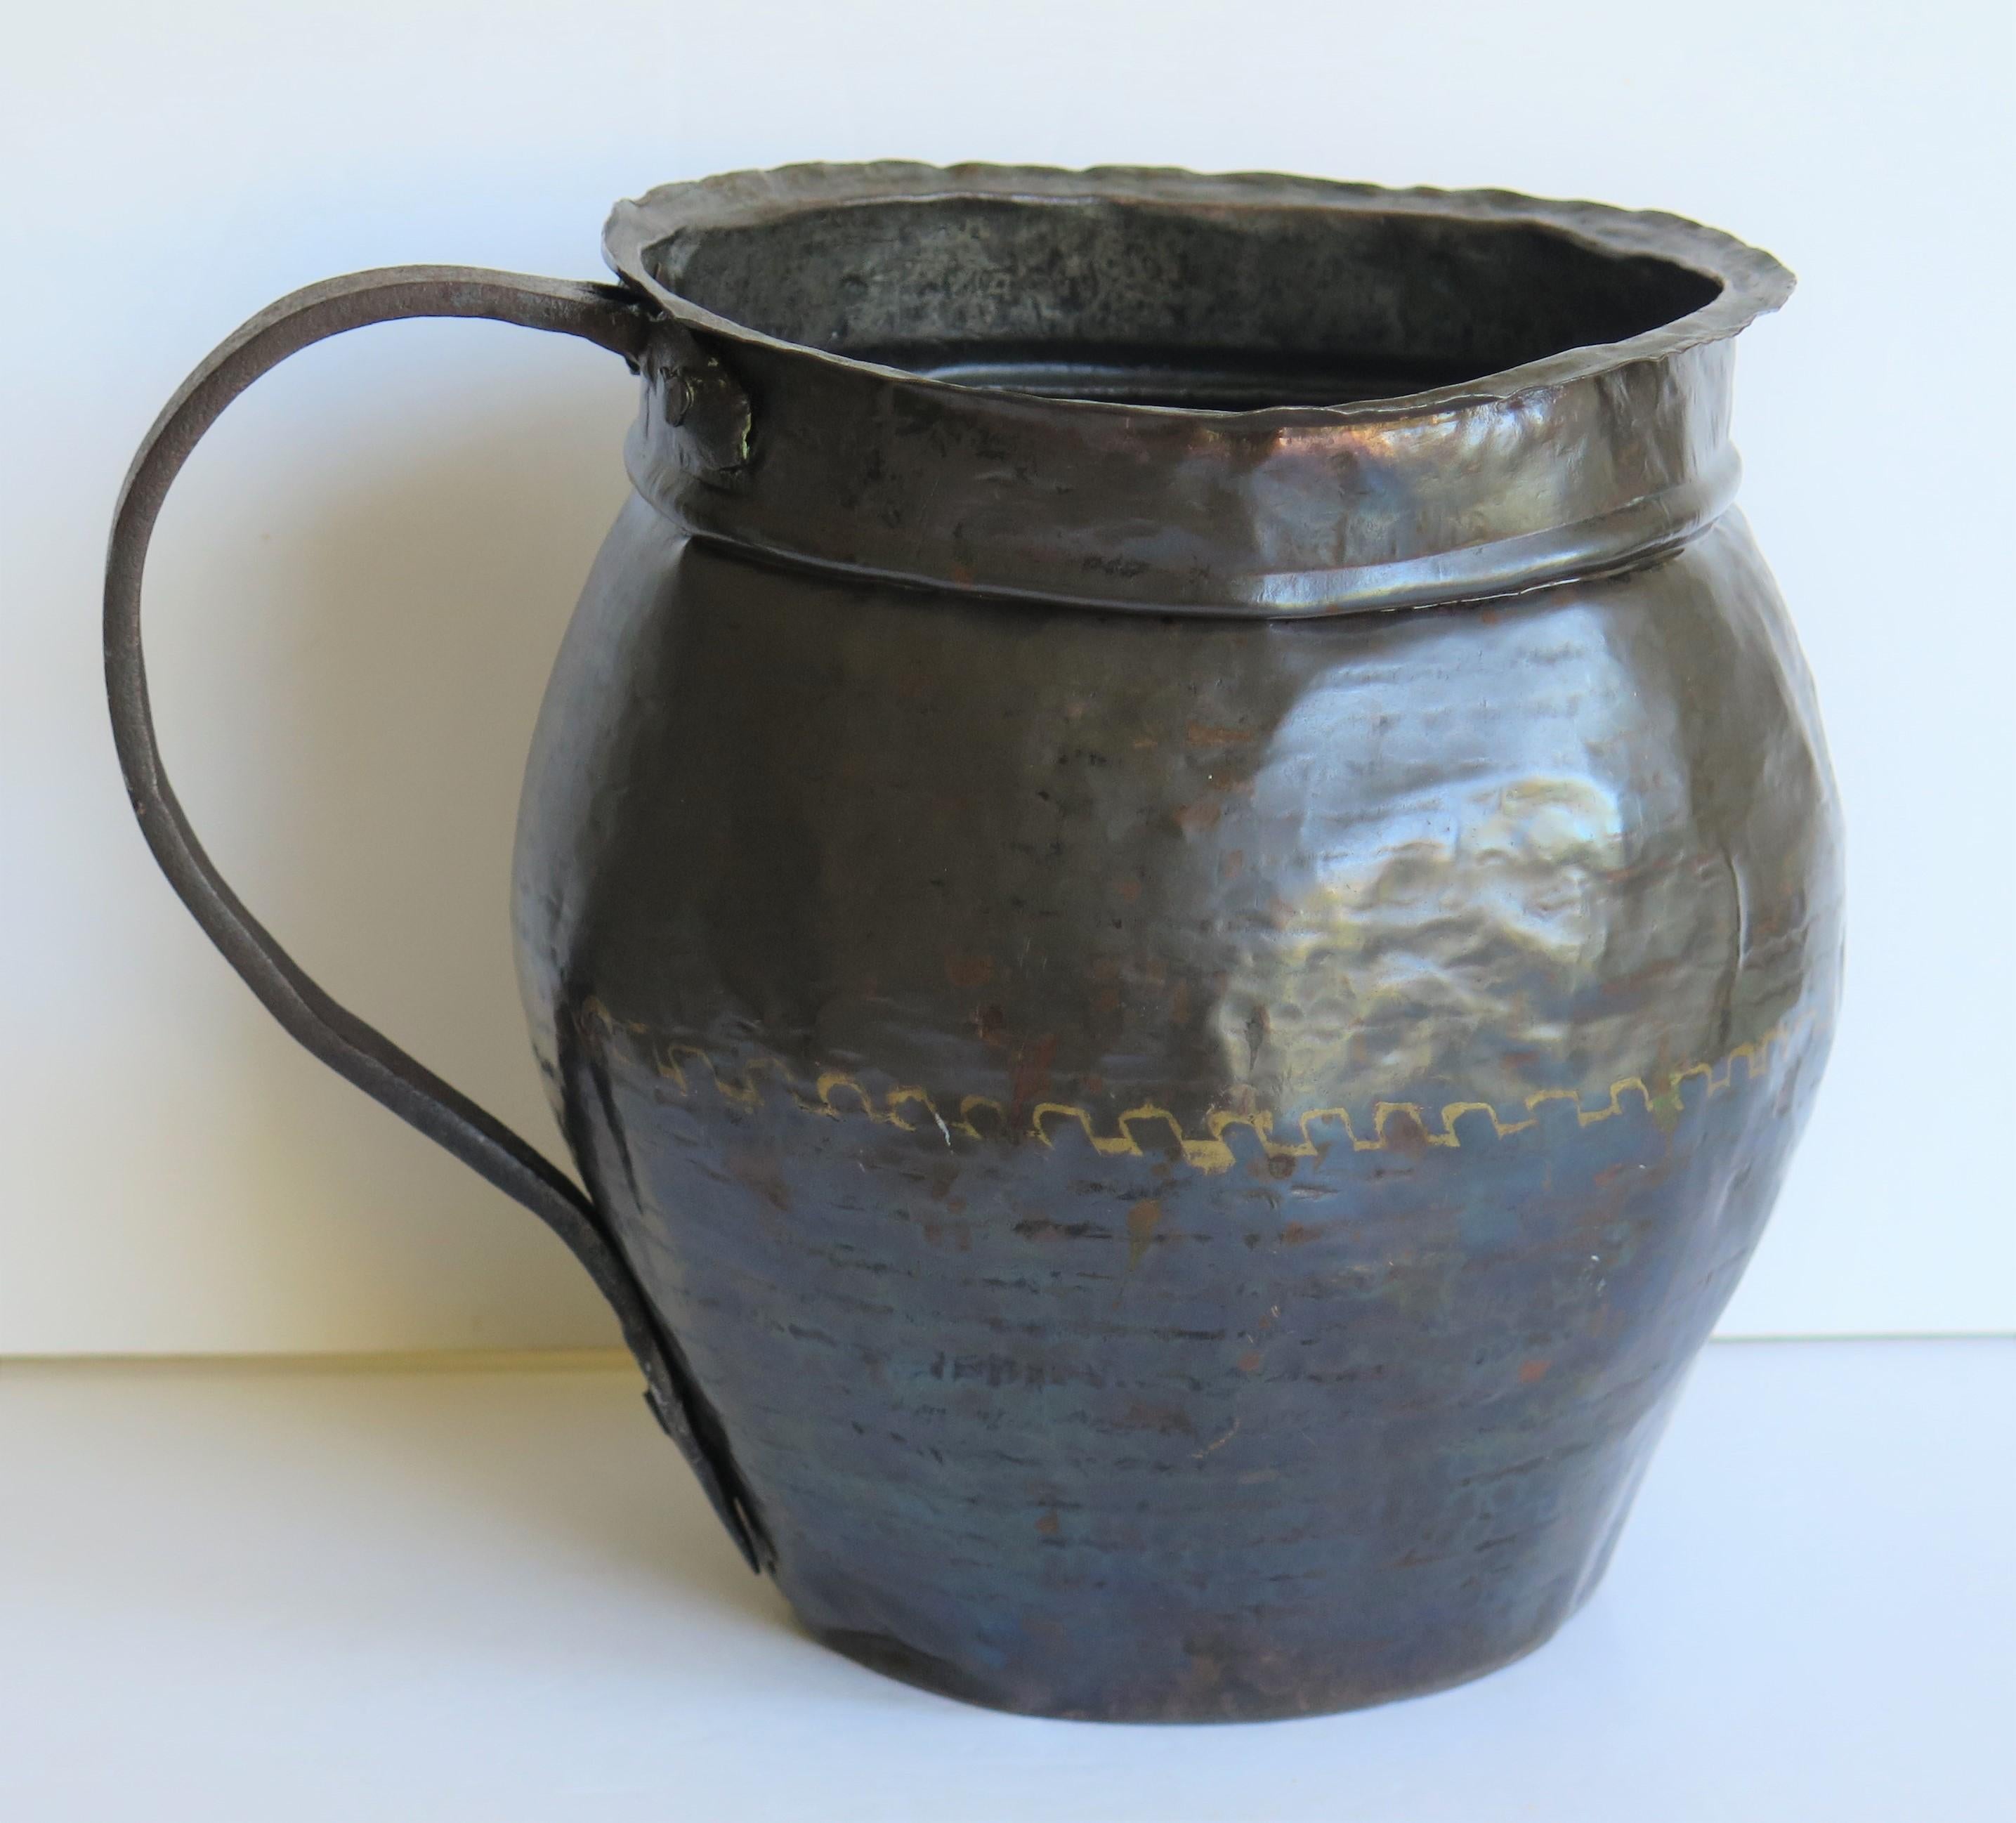 This is an interesting 18th century, French, hammered copper jug or pitcher with an iron loop handle.

The jug or pitcher is all hand made with a hammered copper body and formed rim with an iron loop handle riveted to the body. The jug body is